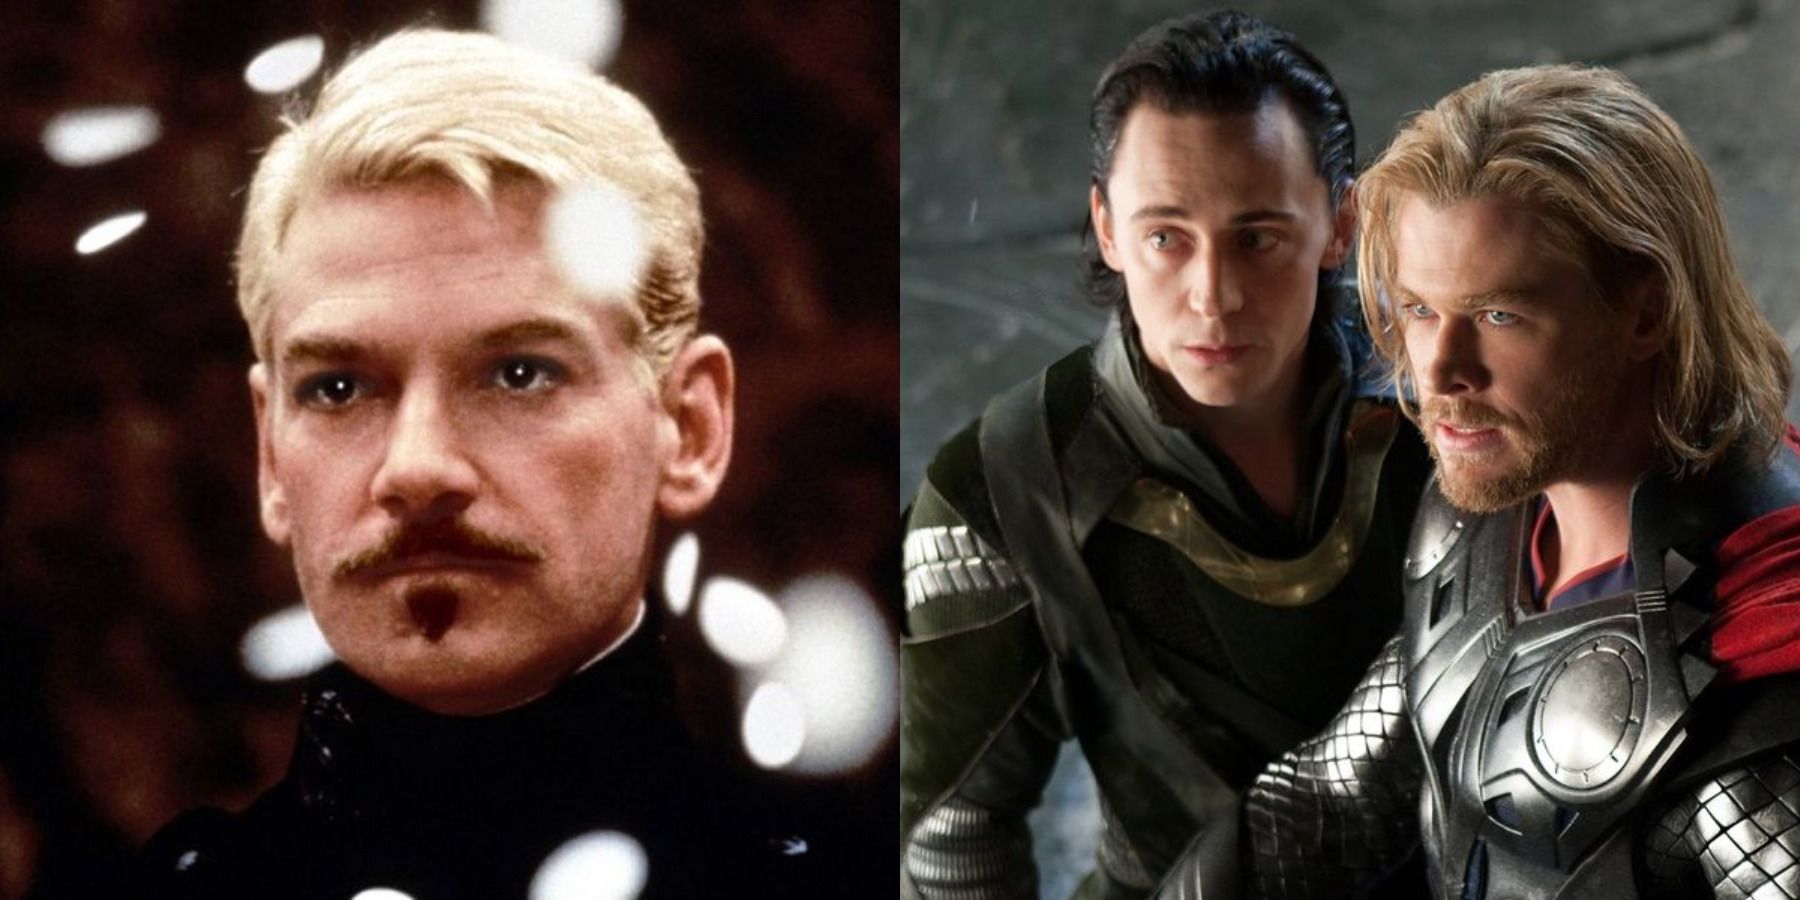 Best Kenneth Branagh directorial work feature split image Hamlet and Thor